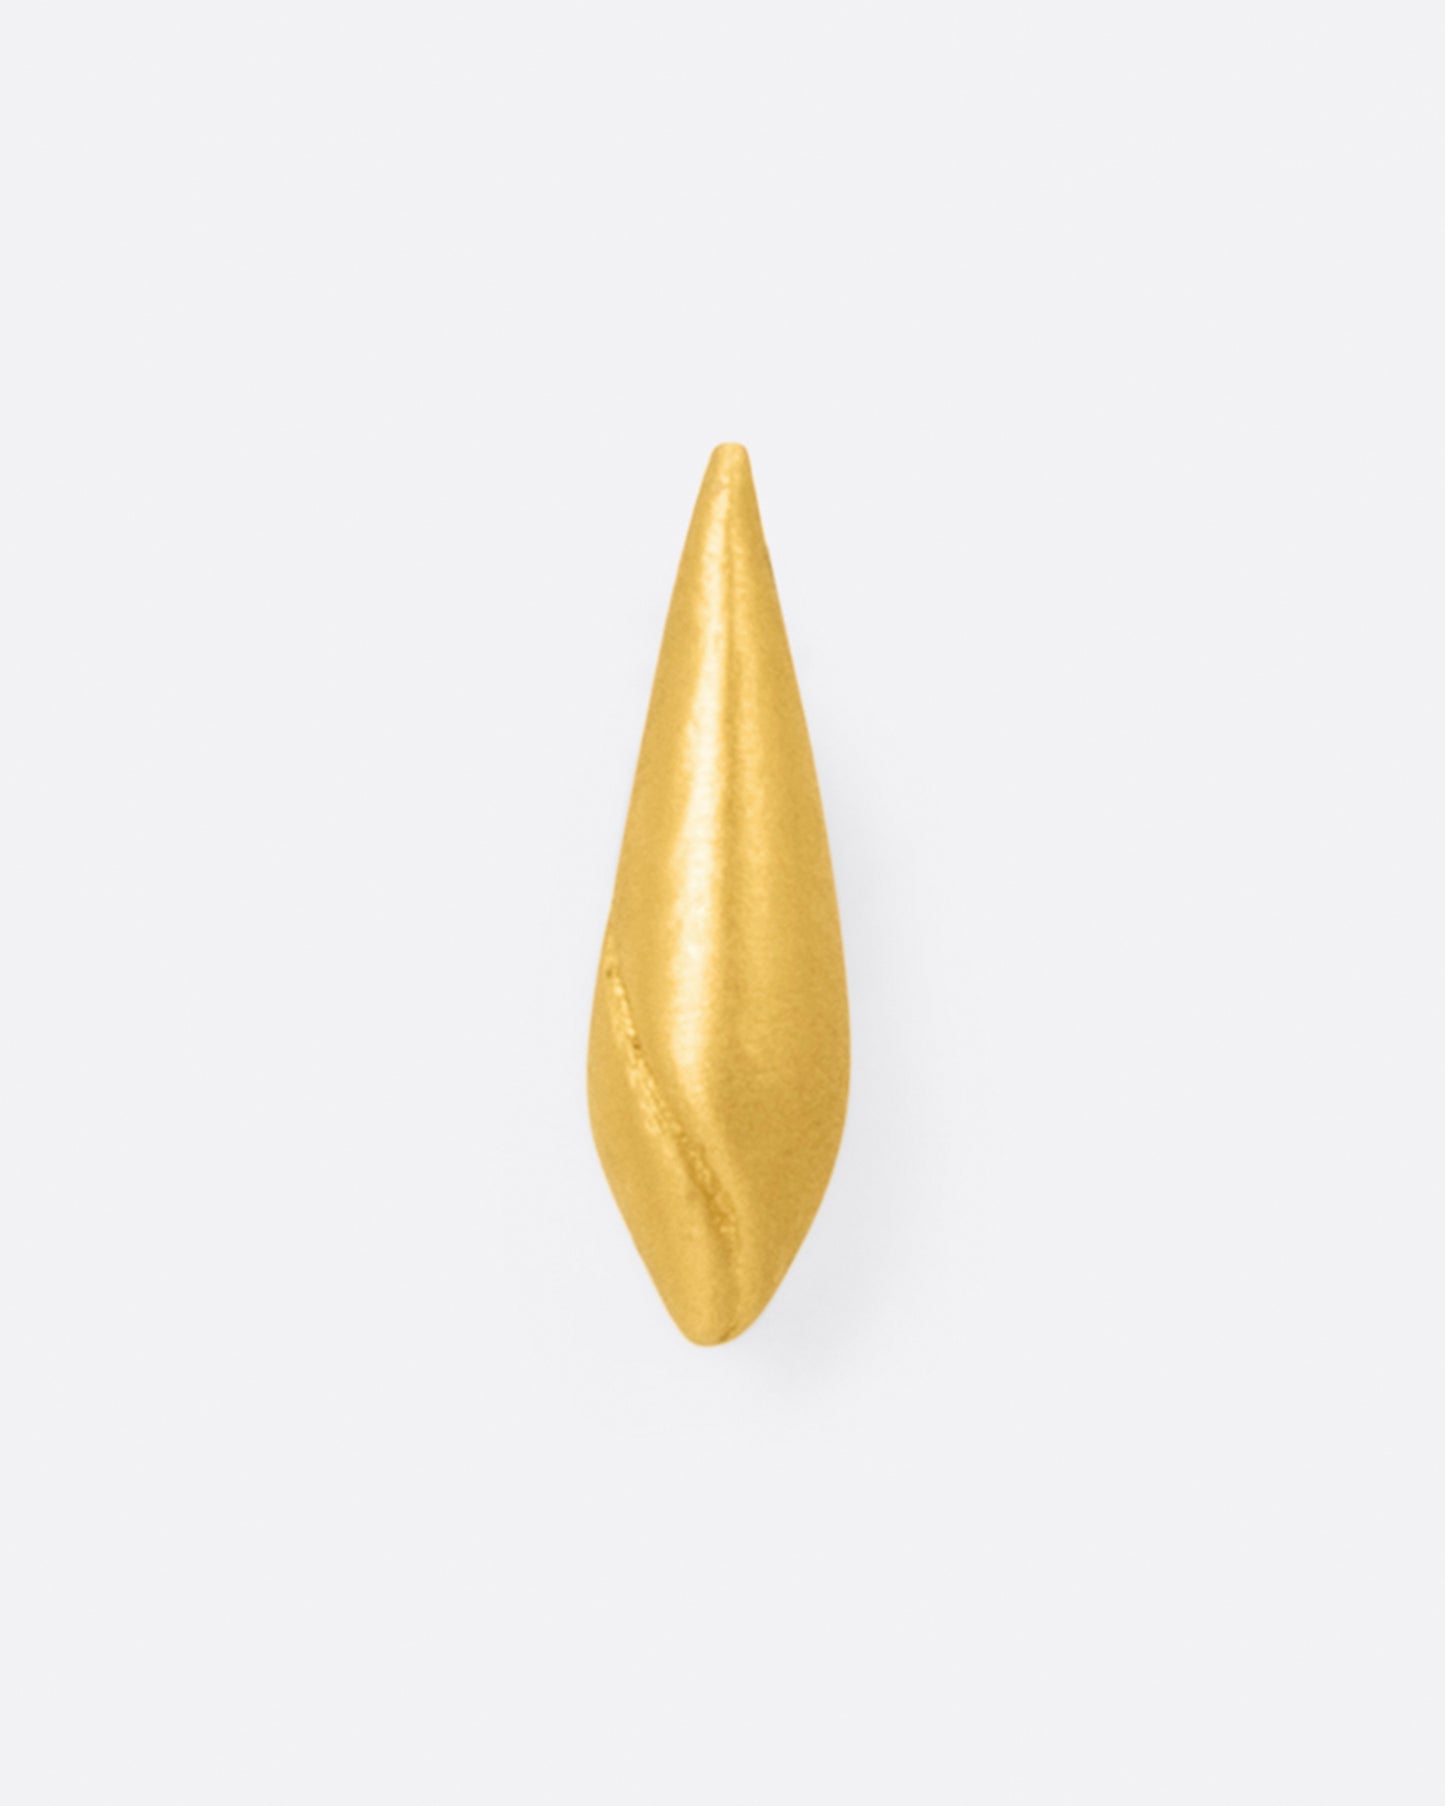 A cone shaped 22k yellow gold stud earring with a line following the curve of the earring, shown from the front.